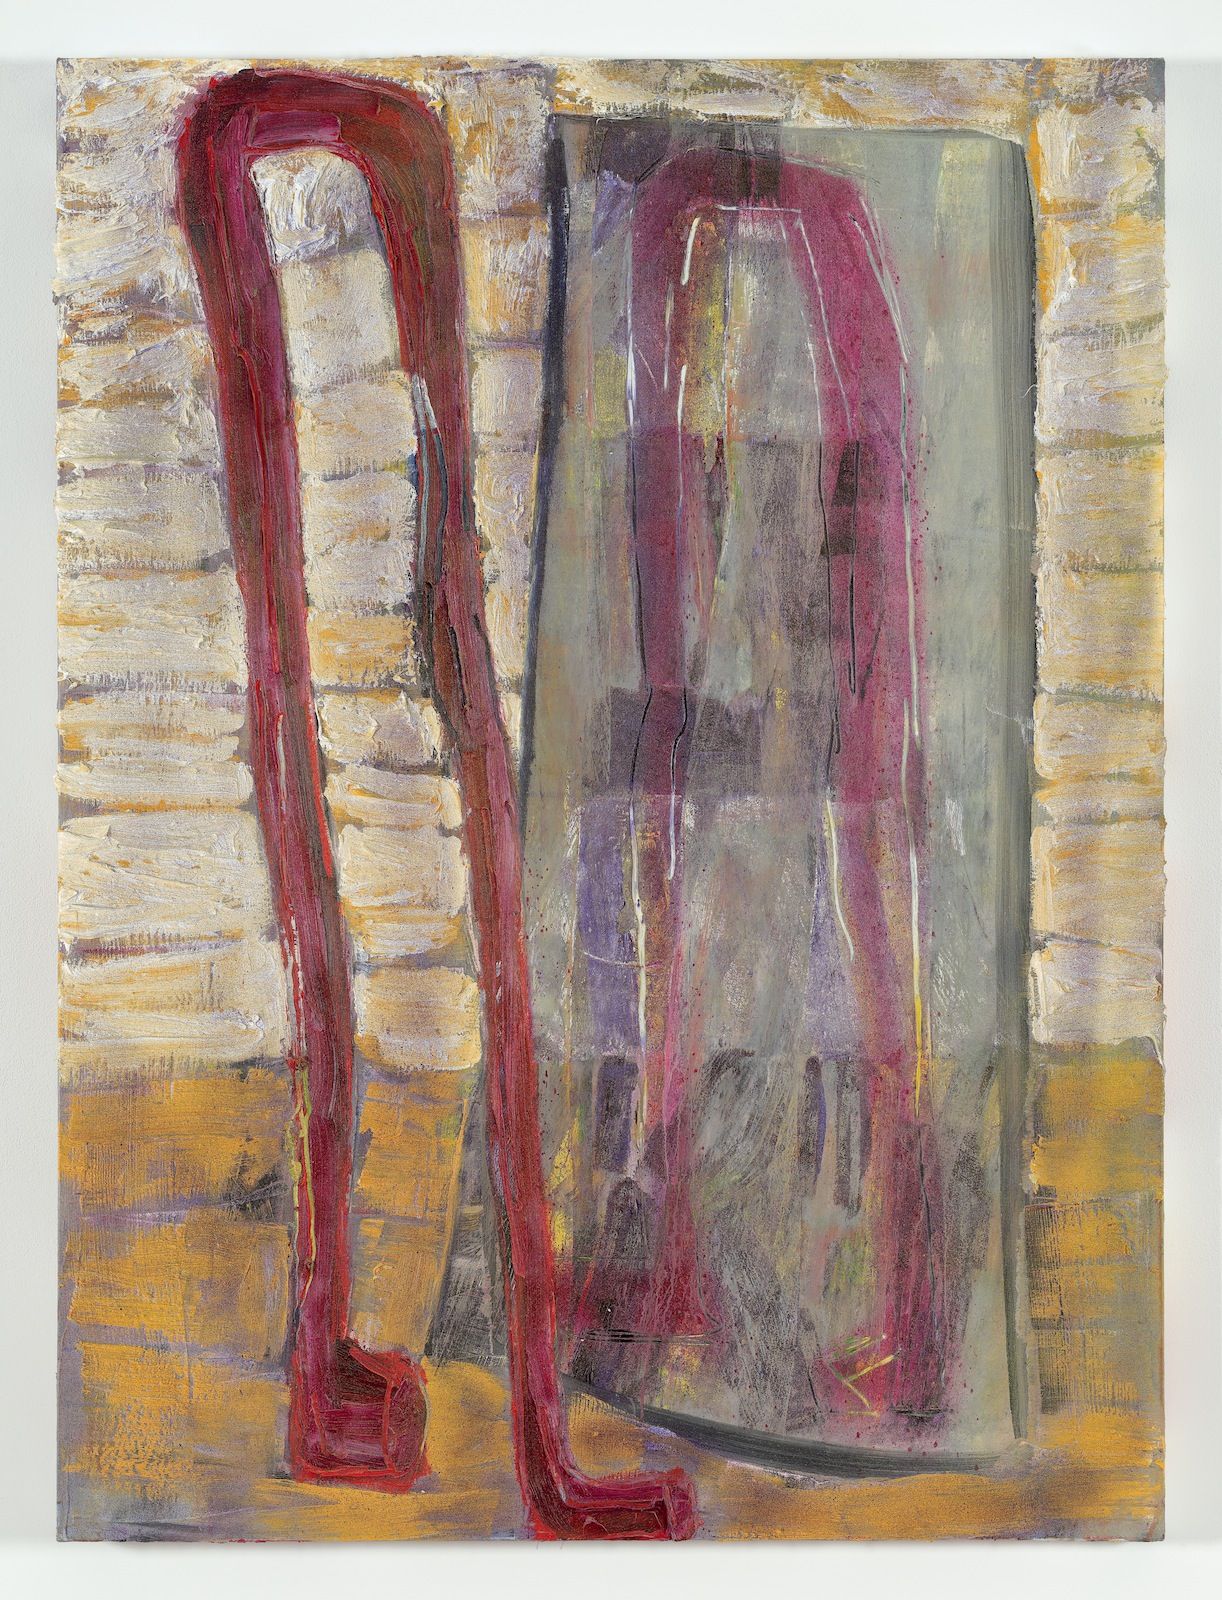 Gabriel Hartley, Prune, 2014, oil and spray paint on canvas, 63 × 47 in.